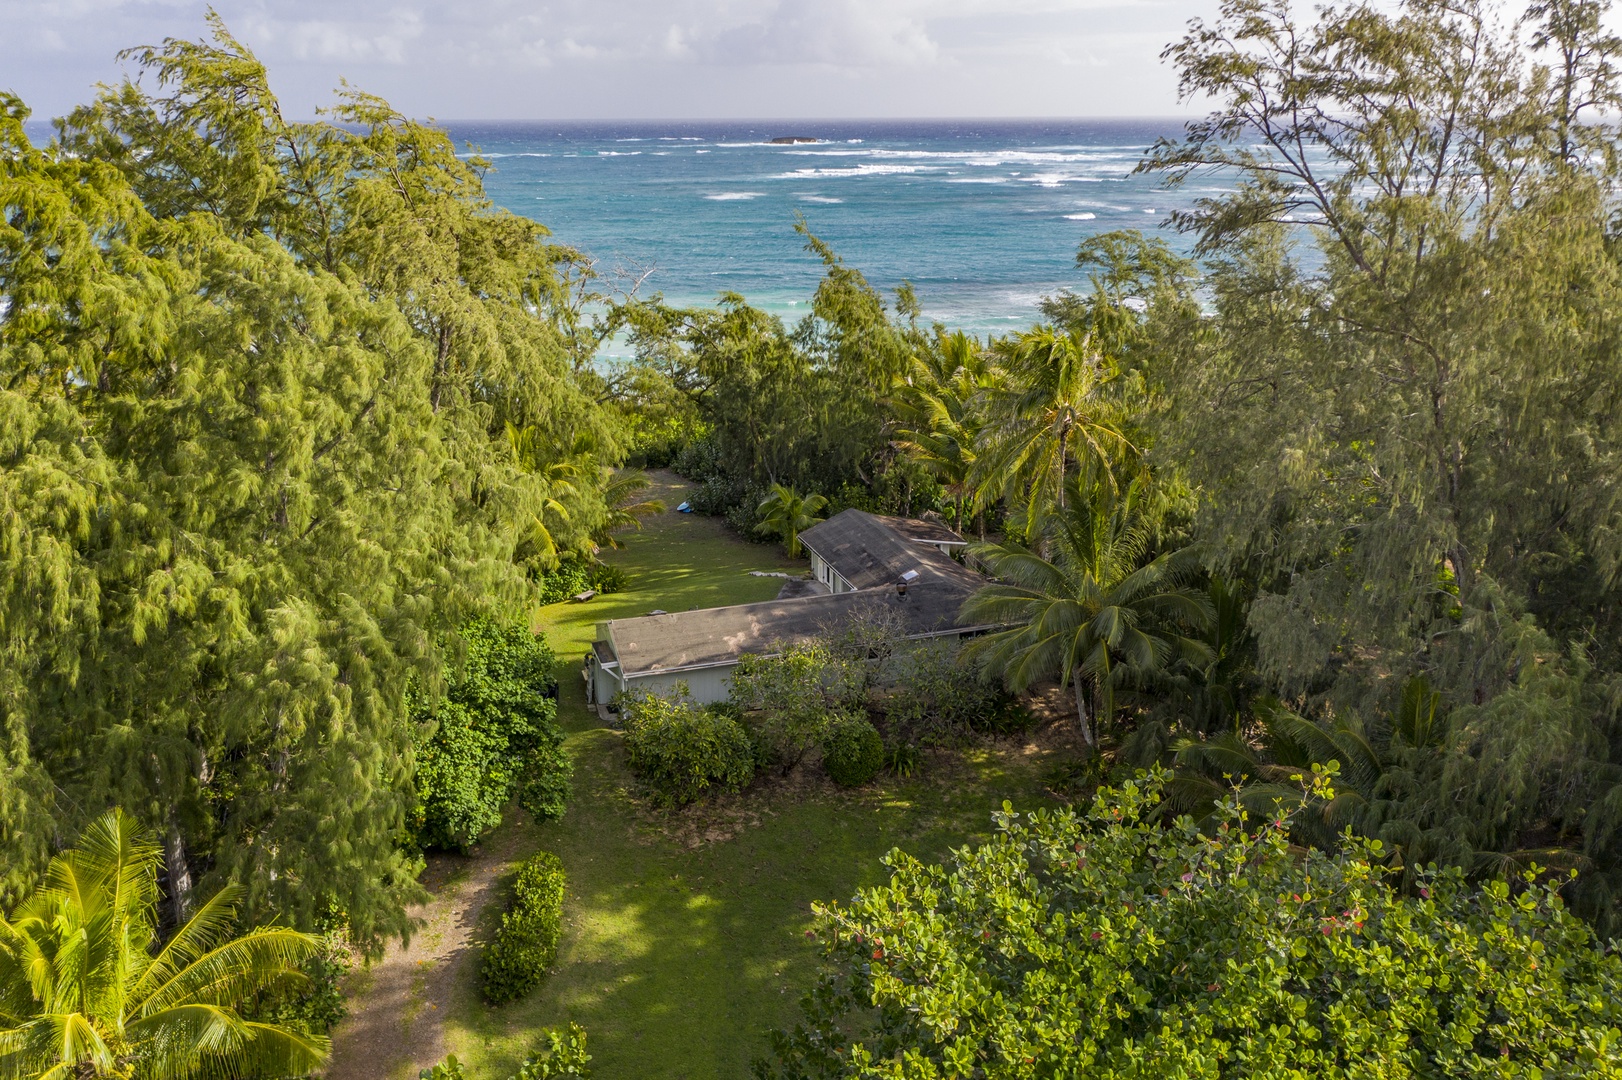 Kahuku Vacation Rentals, Hale Ula Ula - View of entire property, which sits on an area of land.